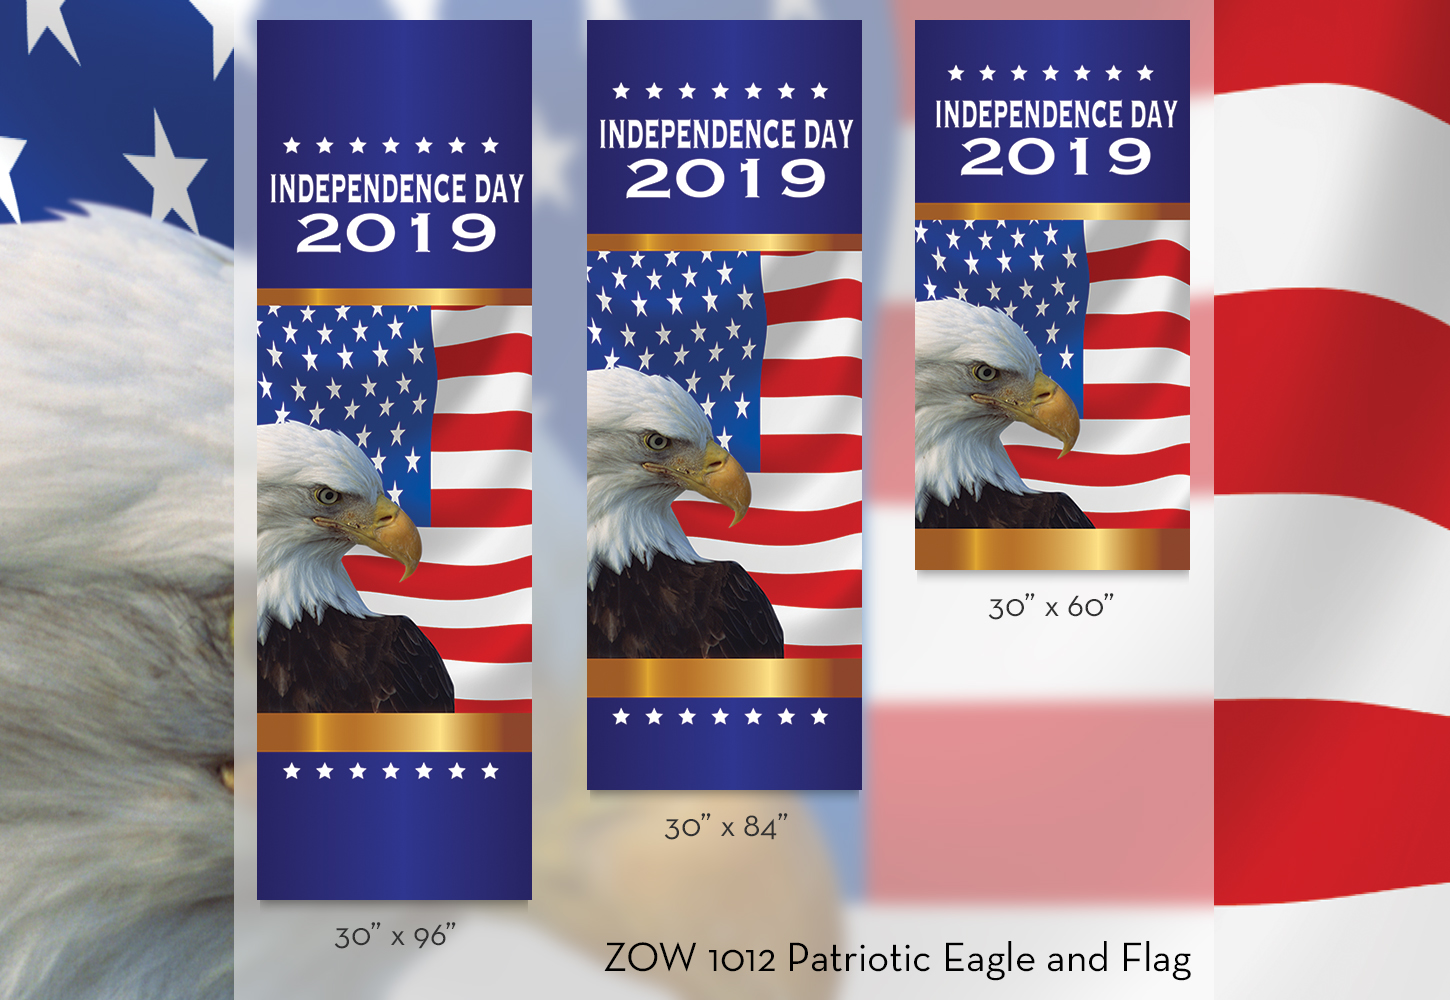 ZOW 1012 Patriotic Eagle and Flag